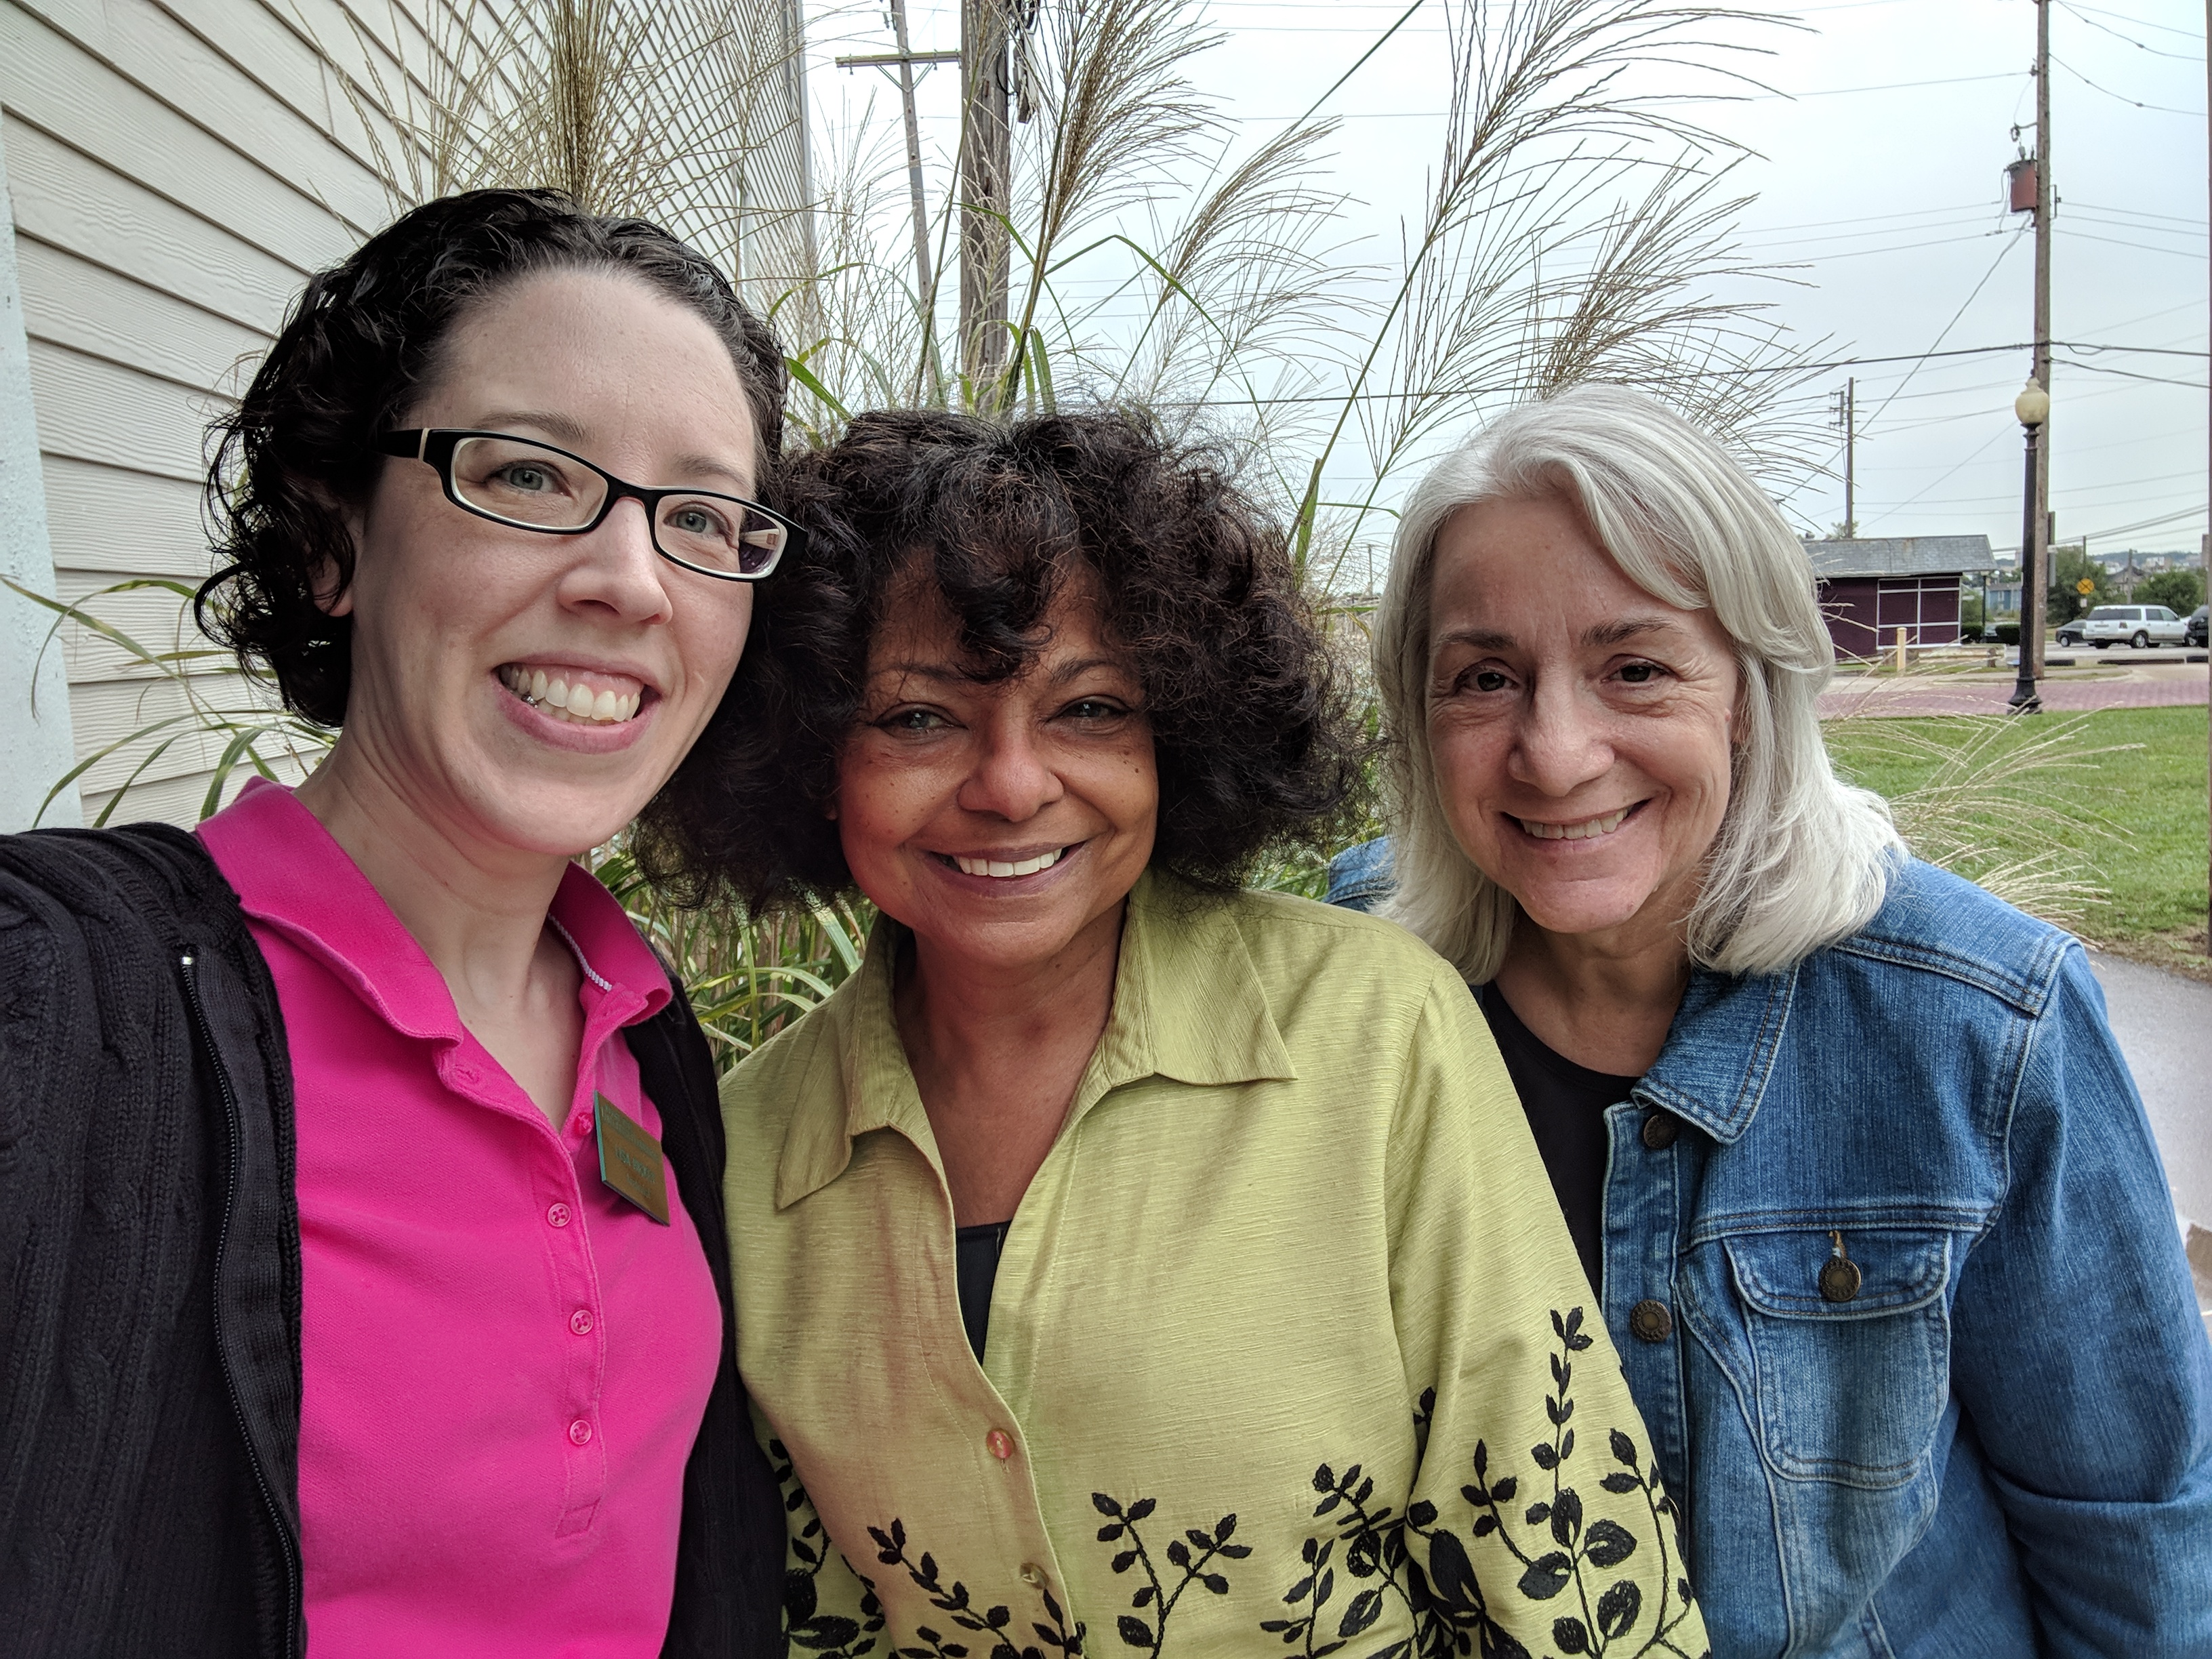 Archivists Lisa Rickey (left) and Dawne Dewey (right), with Rhine McLin (center), in September 2018, during the collection pick-up.